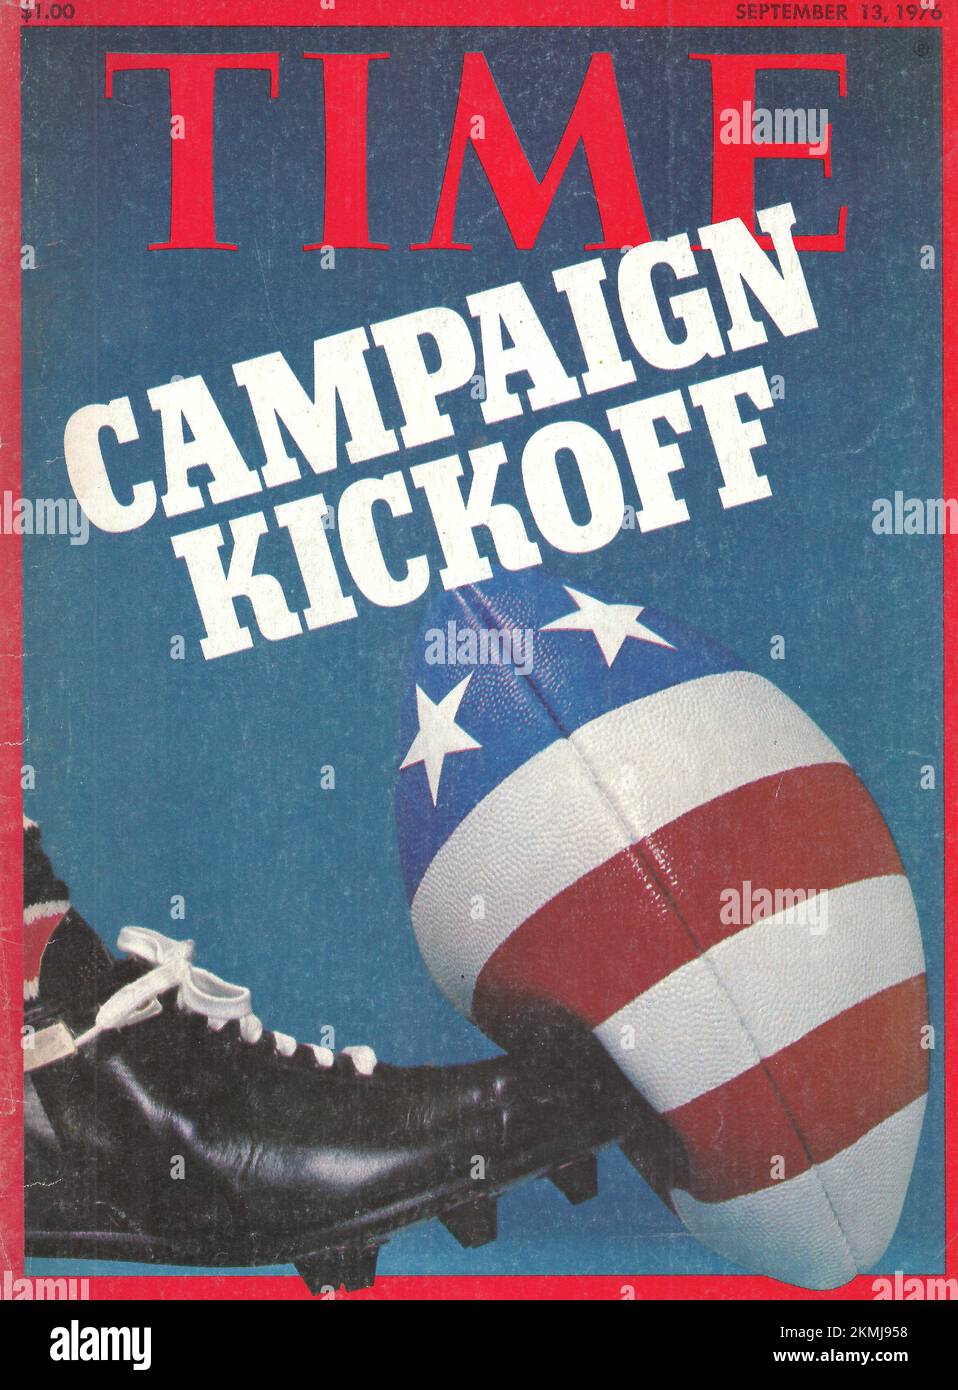 Front page of Time magazine September 13, 1976 Campaign Kickoff Stock Photo